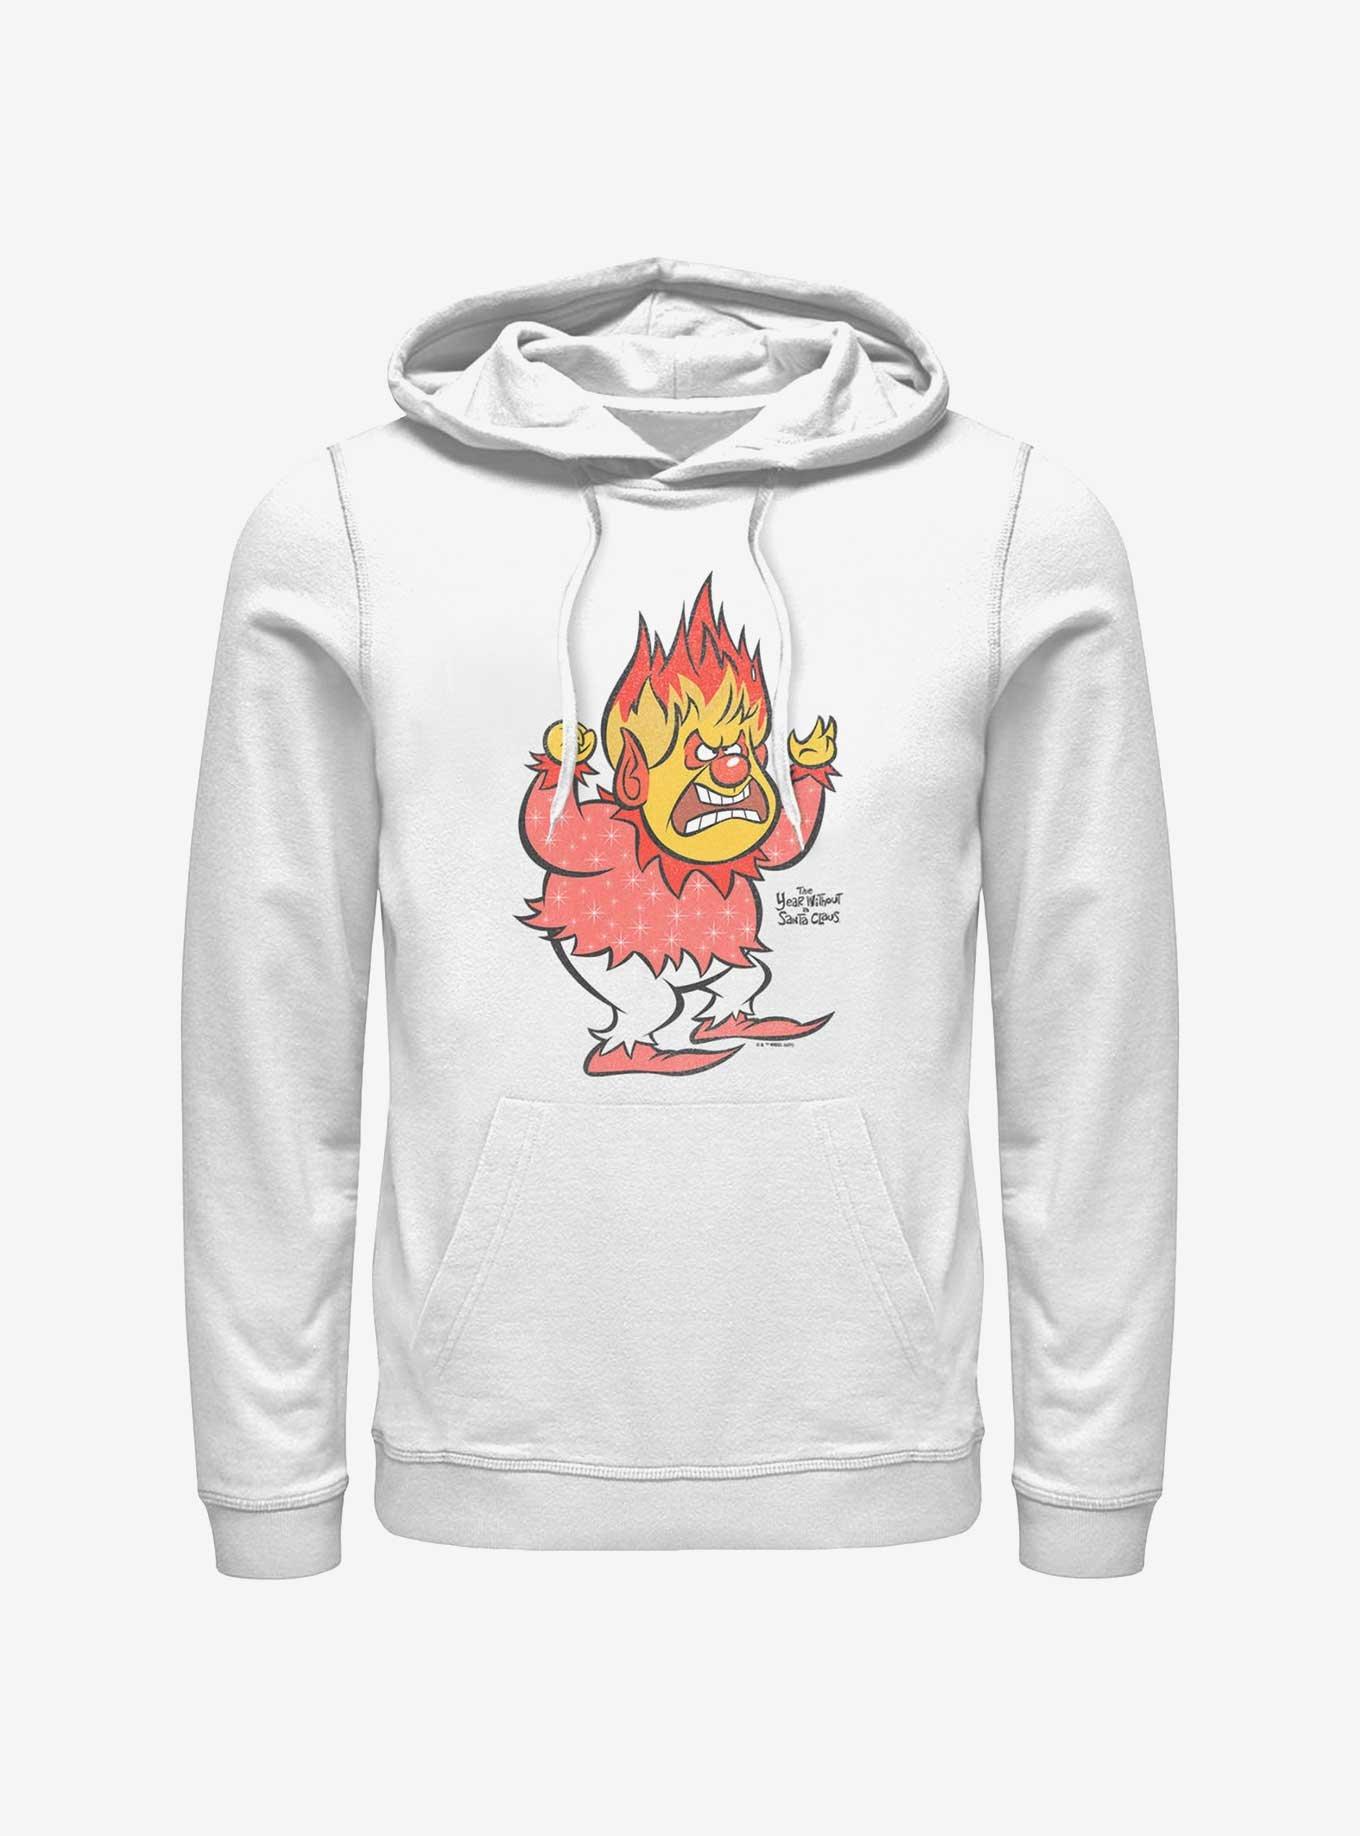 The Year Without a Santa Claus Vintage Heat Miser Hoodie